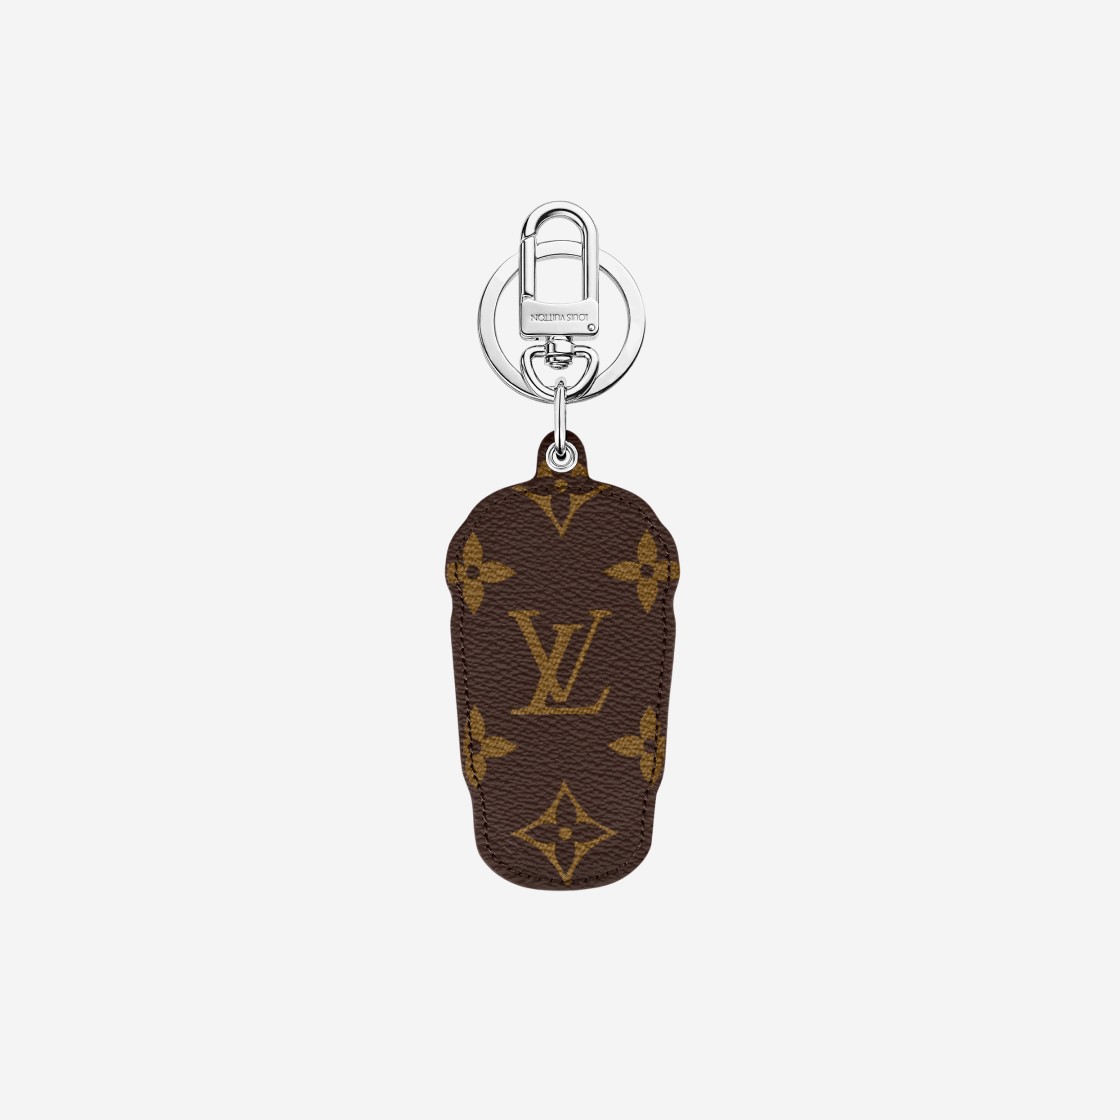 Louis Vuitton Everyday LV Coffee Cup Bag Charm and Key Holder